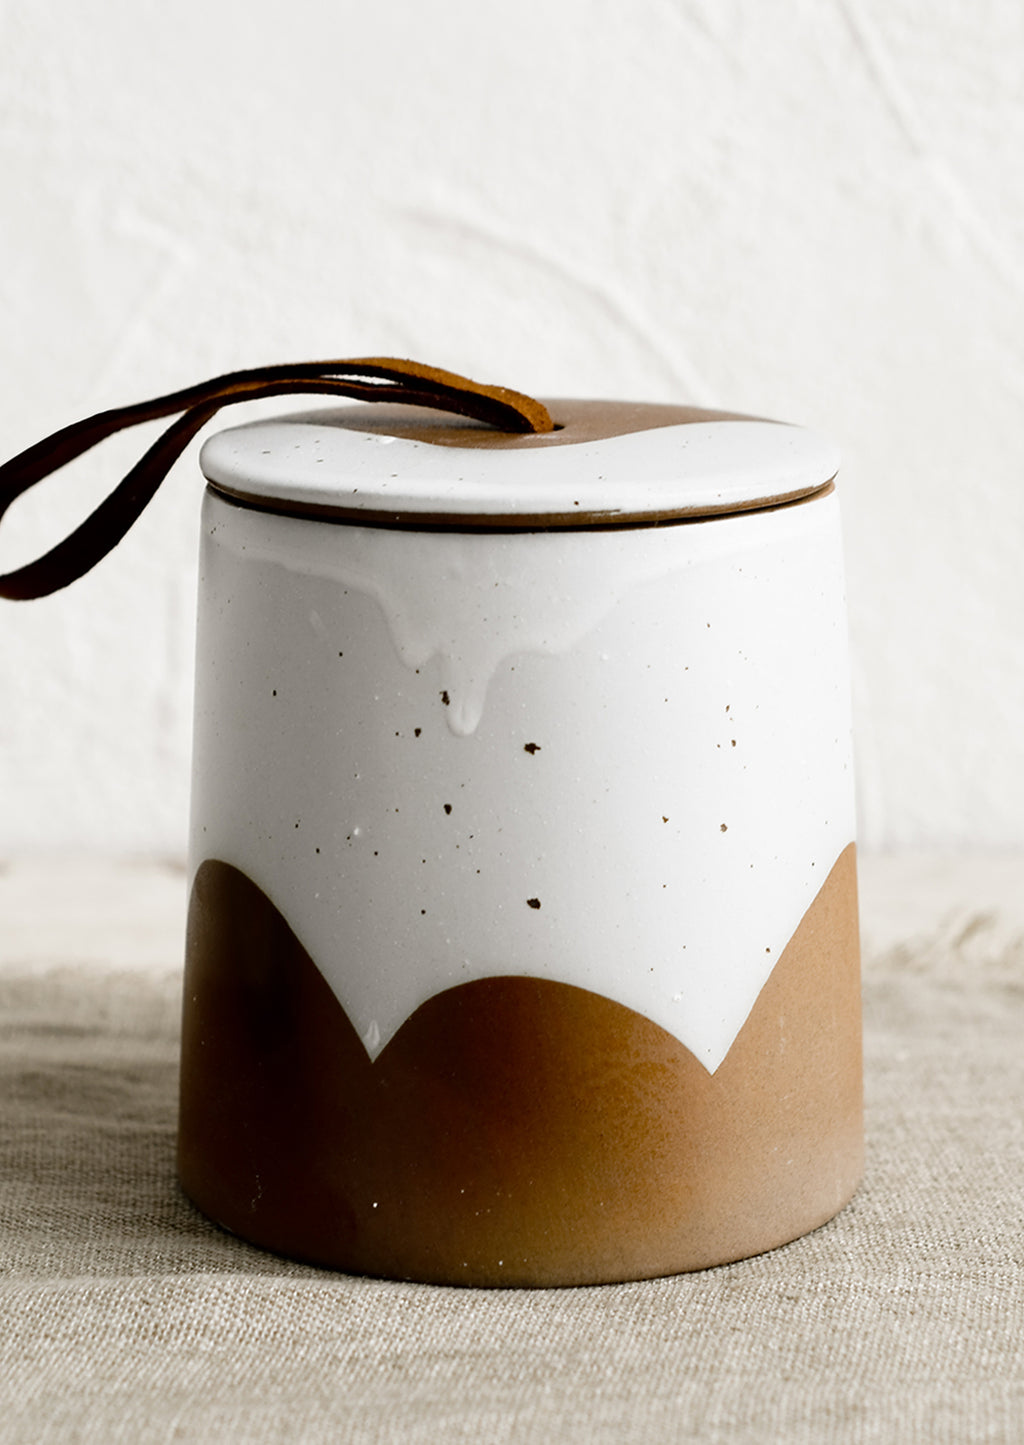 1: A brown and white ceramic storage jar with leather tie on lid.